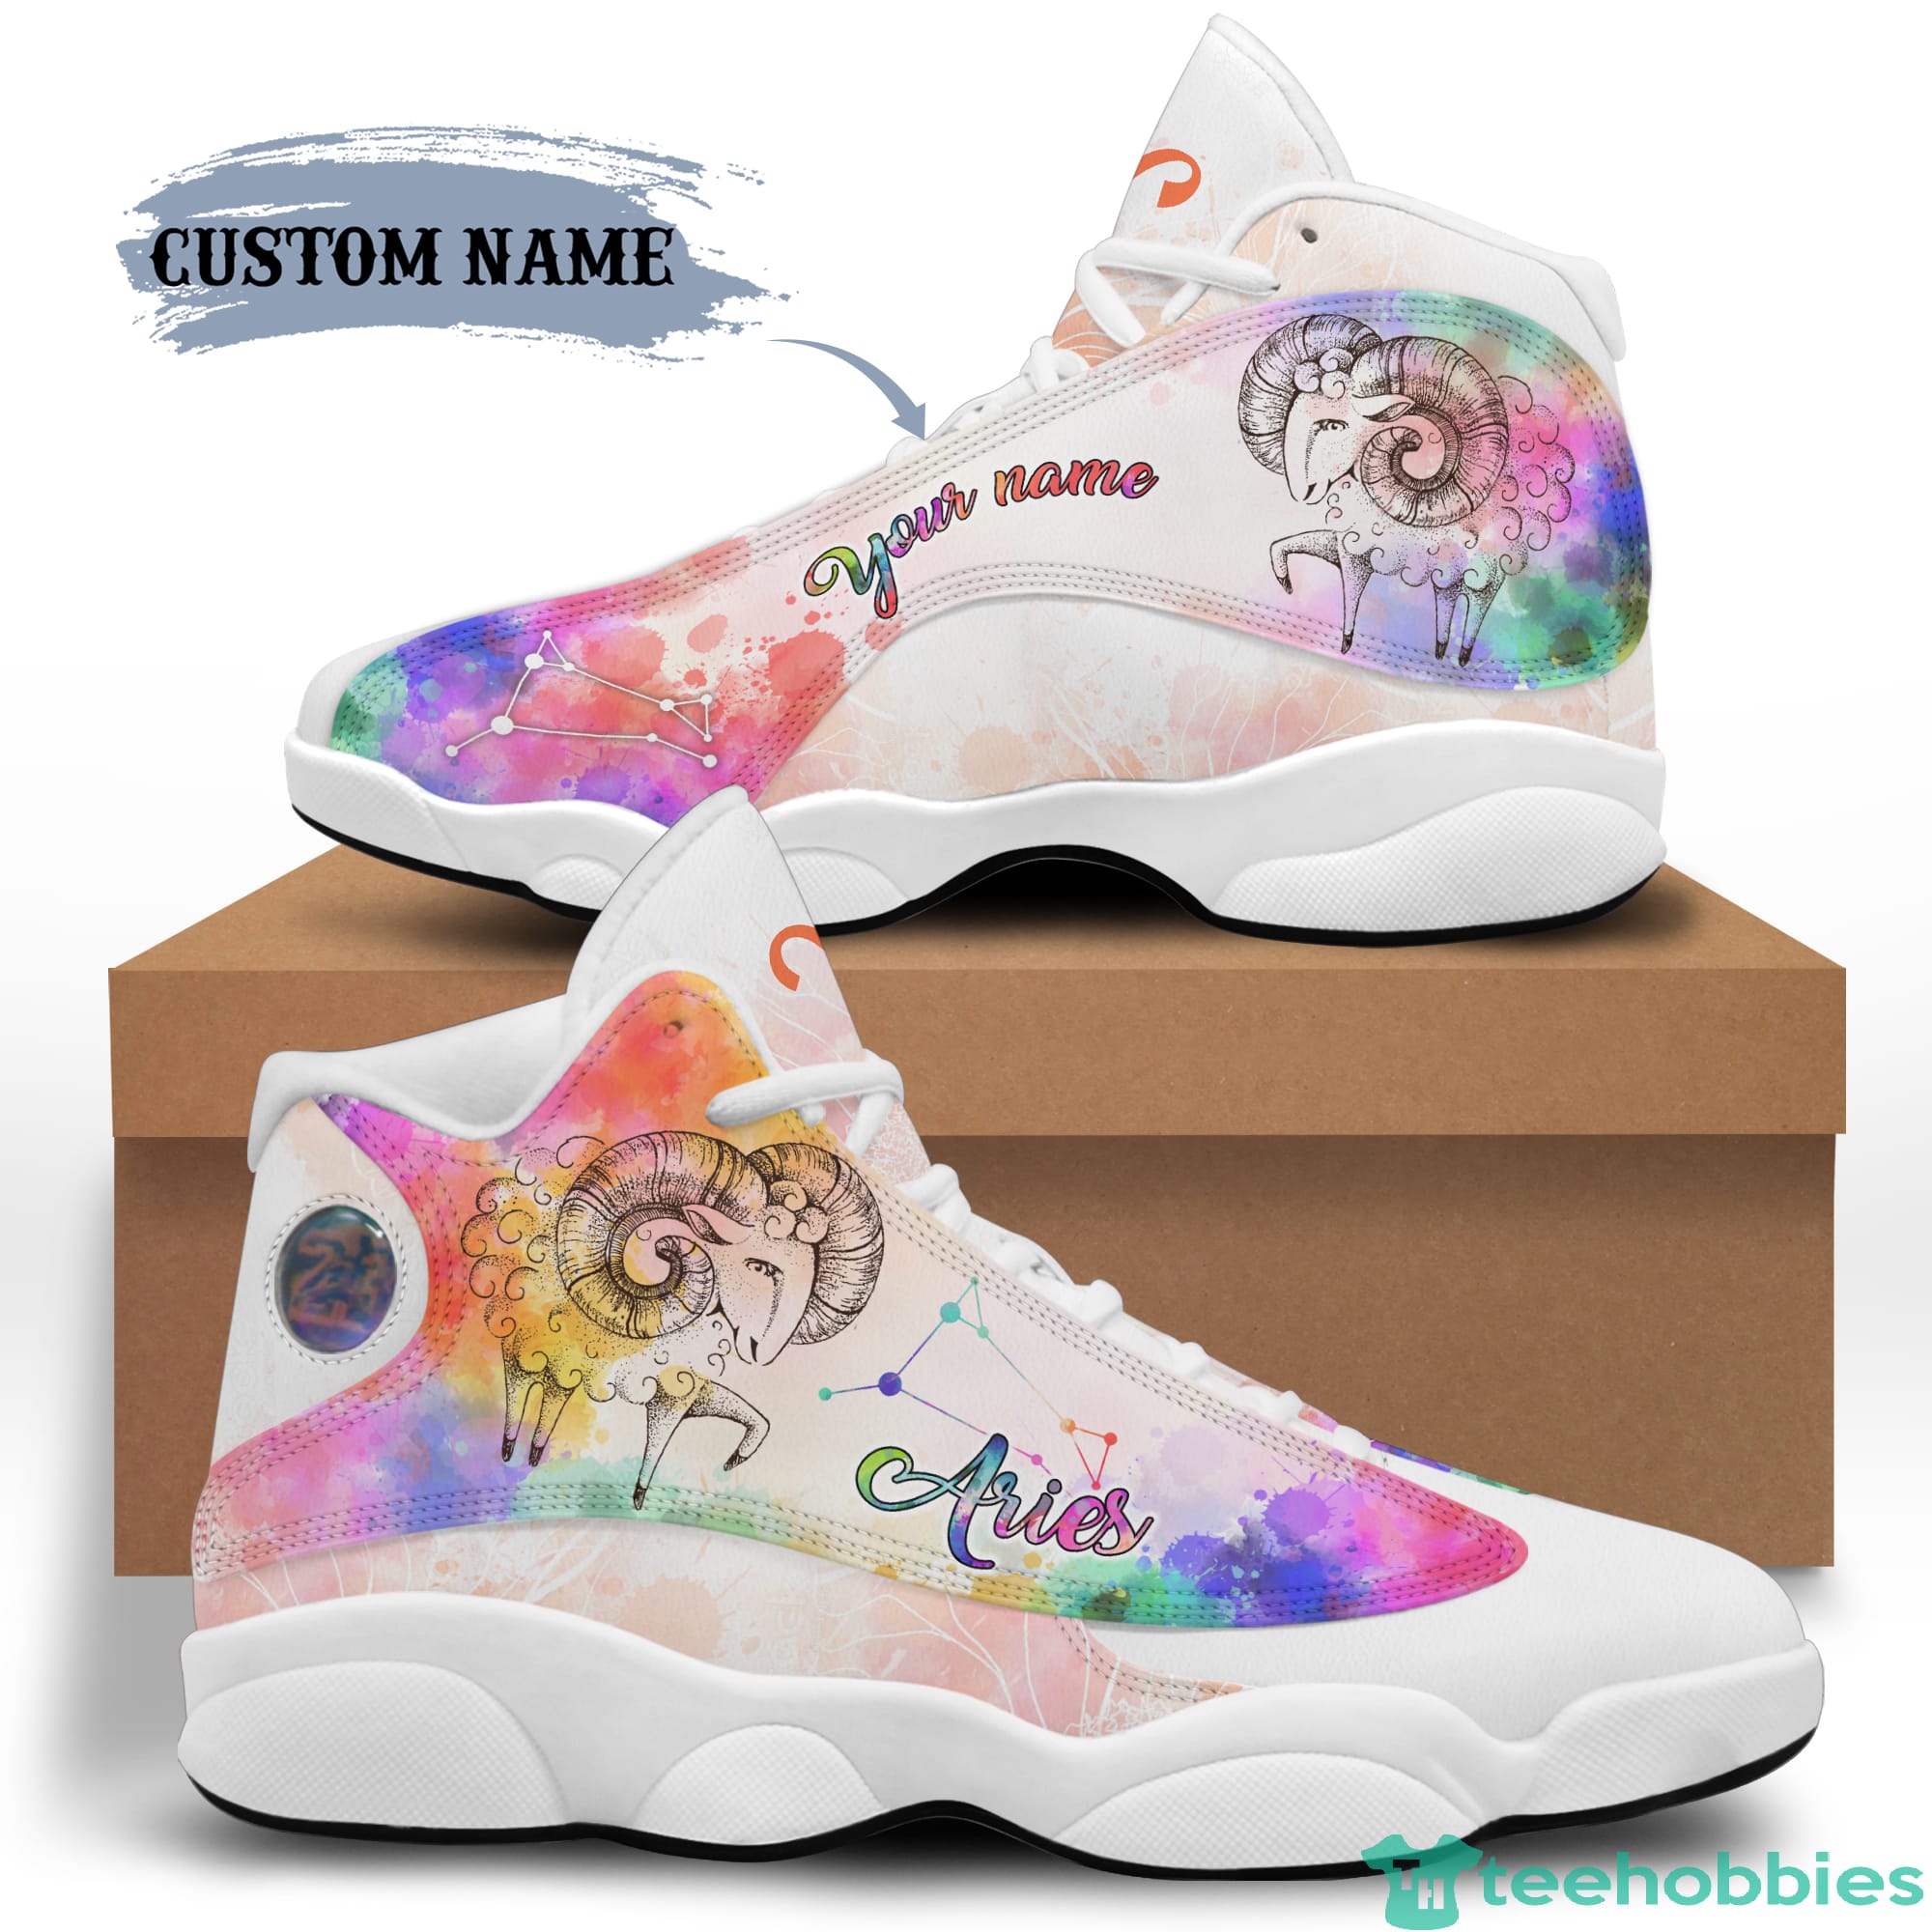 Aries Birthday Gift Personalized Name Personalized Name Air Jordan 13 Shoes SKU-219